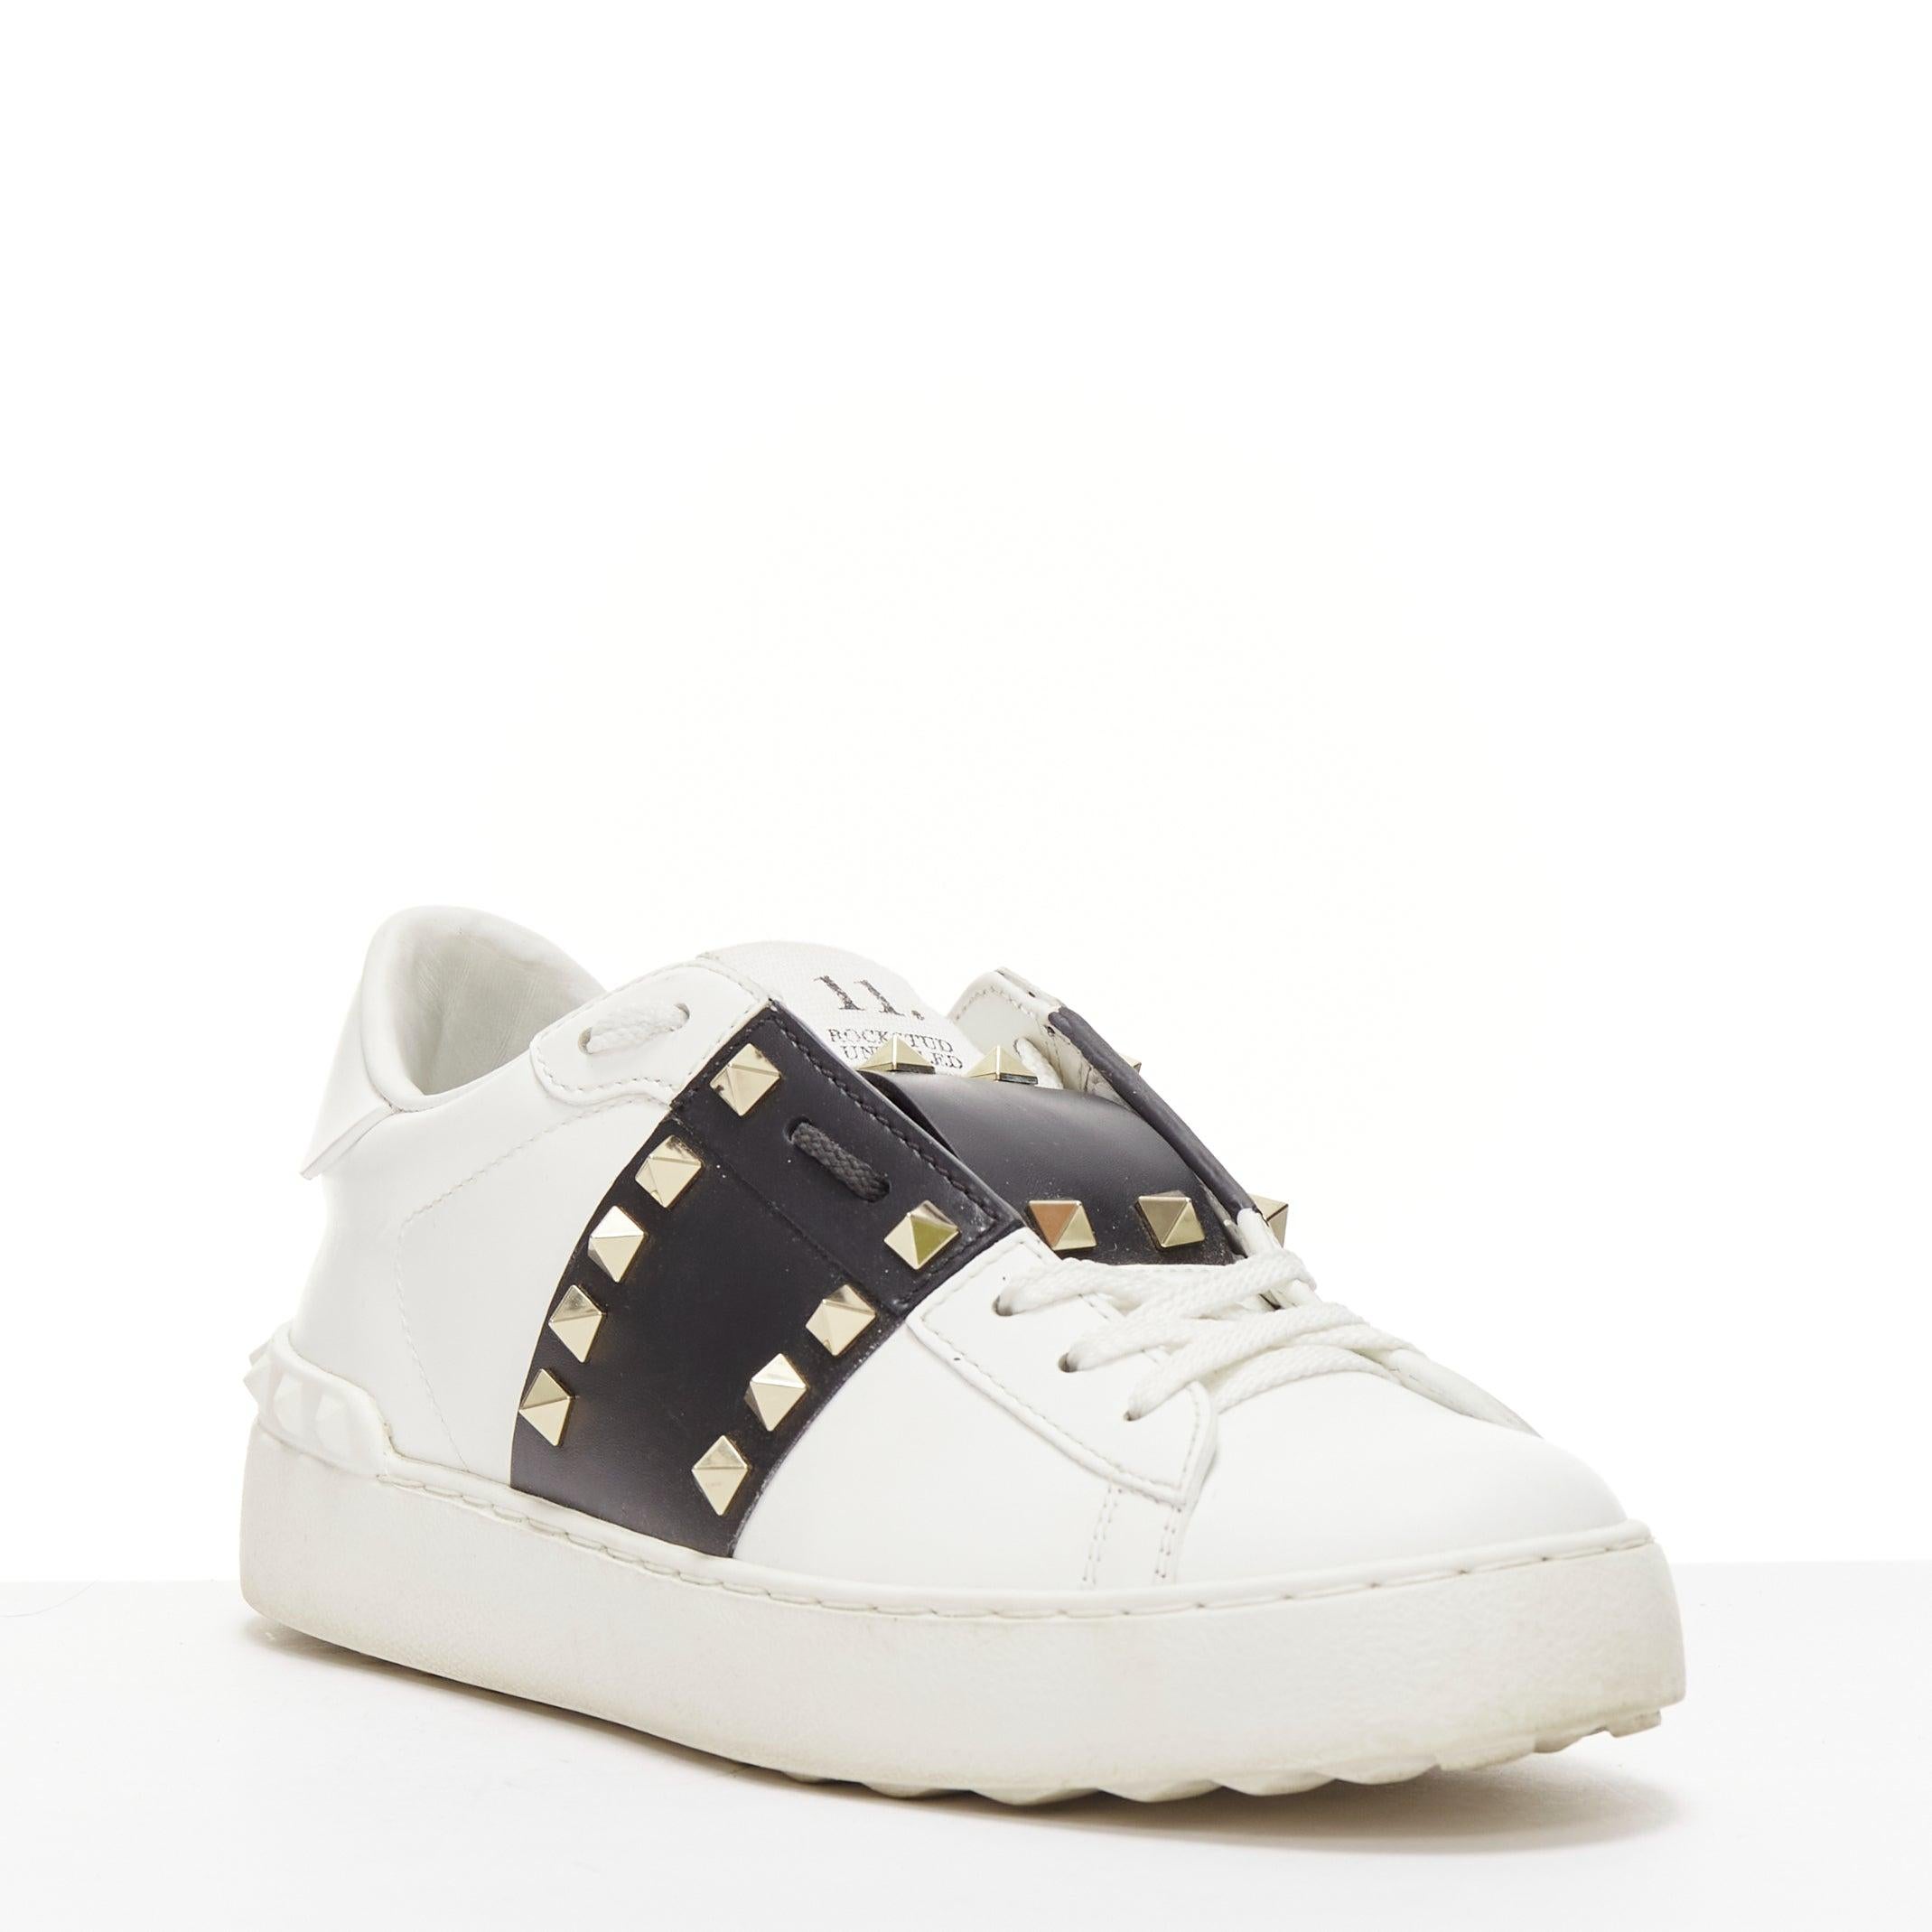 VALENTINO Rockstud Untitled Open black white leather studded sneakers EU37
Reference: NILI/A00066
Brand: Valentino
Model: Rockstud
Material: Leather
Color: White, Black
Pattern: Studded
Closure: Slip On
Lining: White Leather
Extra Details: White